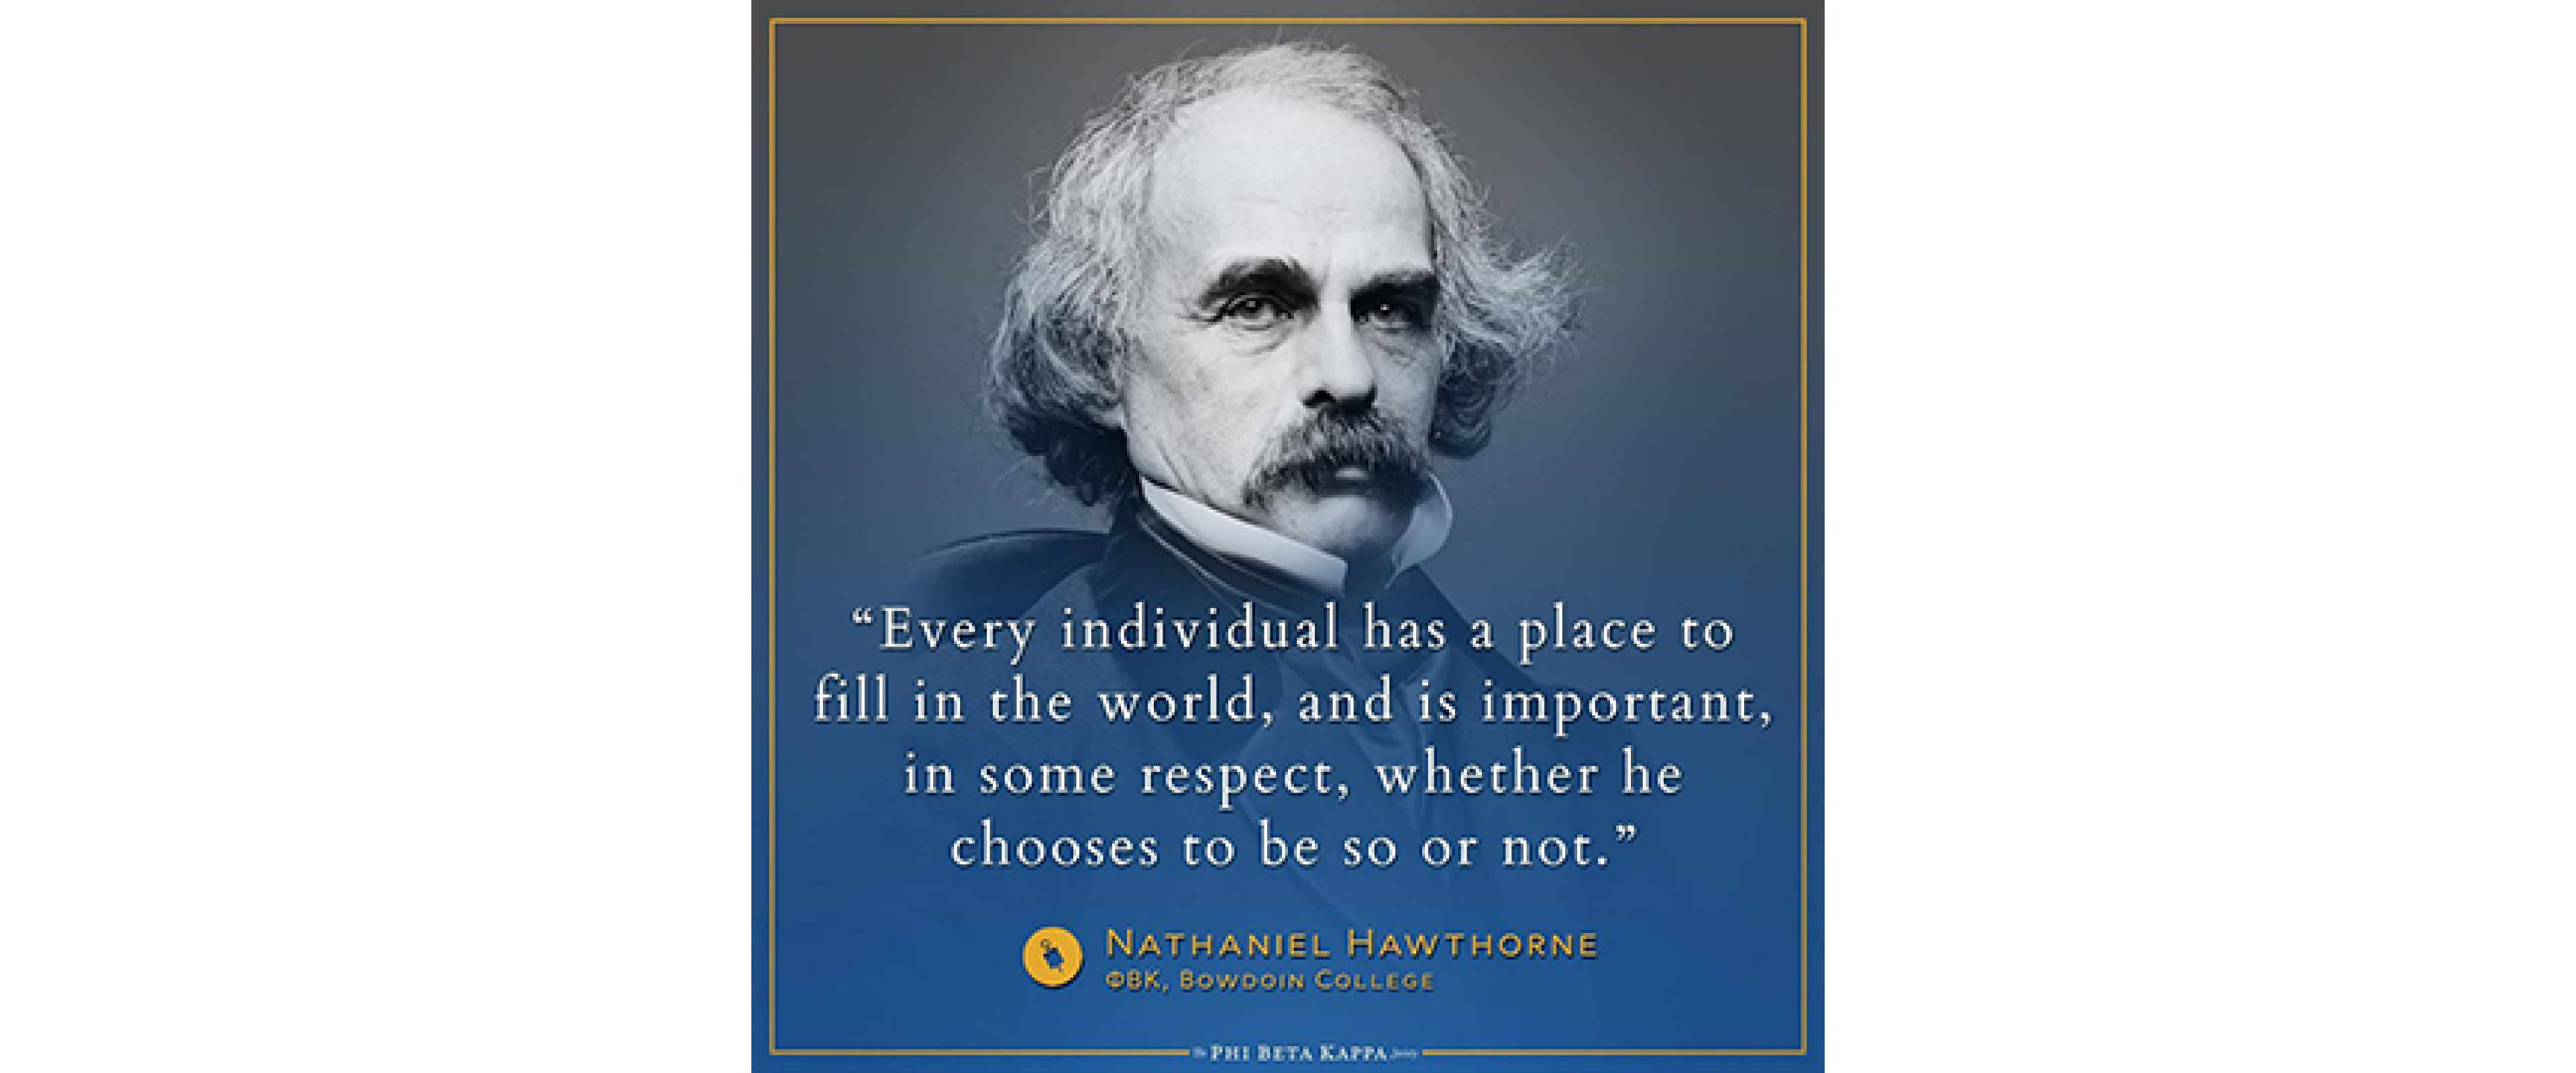 Nathaniel Hawthorne, PBK, Bowdoin College - Every individual has a place to fill in the world, and is important, in some respect, whether he choses to be so or not.